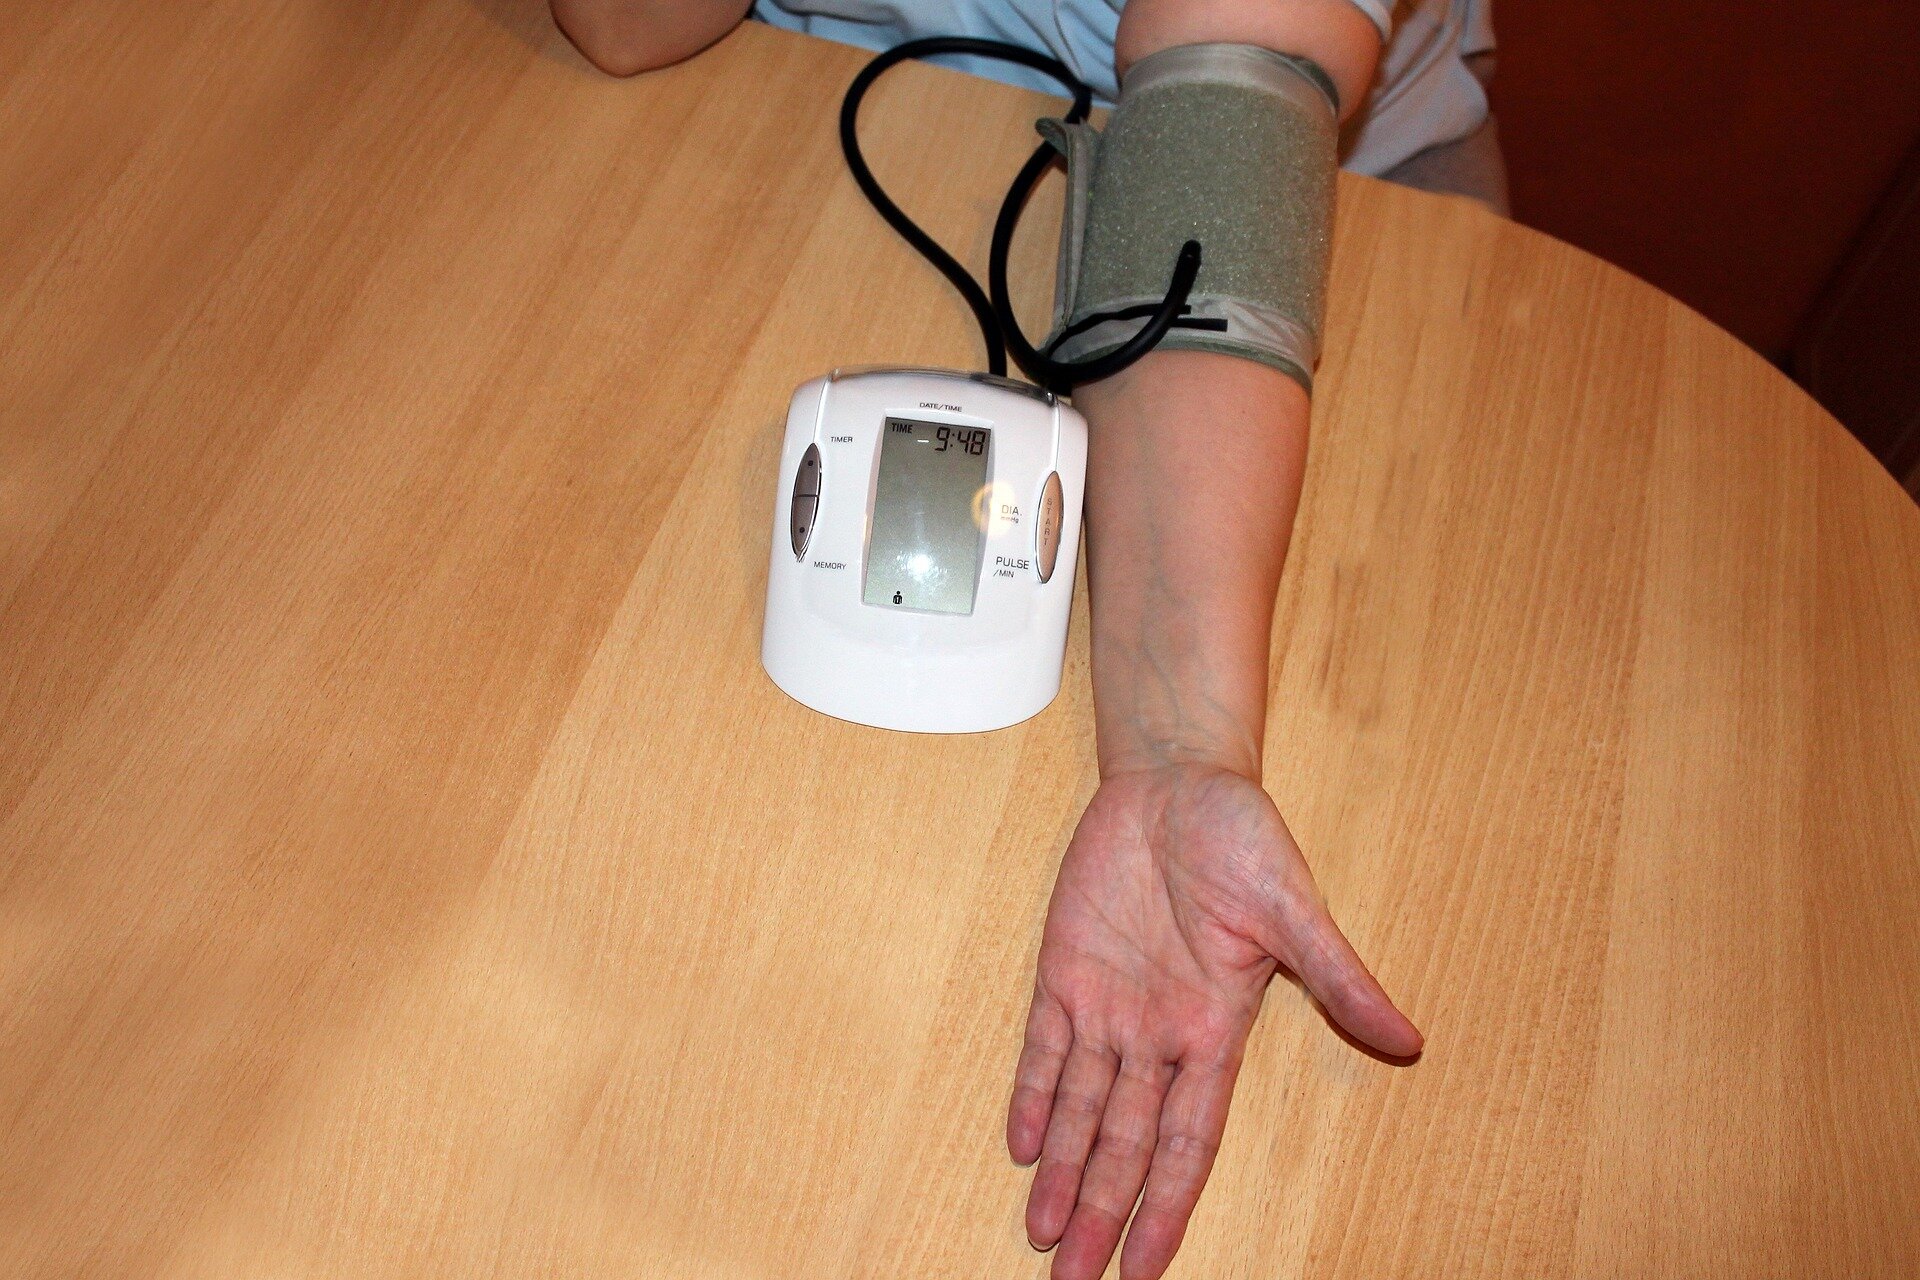 COVID and Medicare payments spark remote patient BP monitoring boom